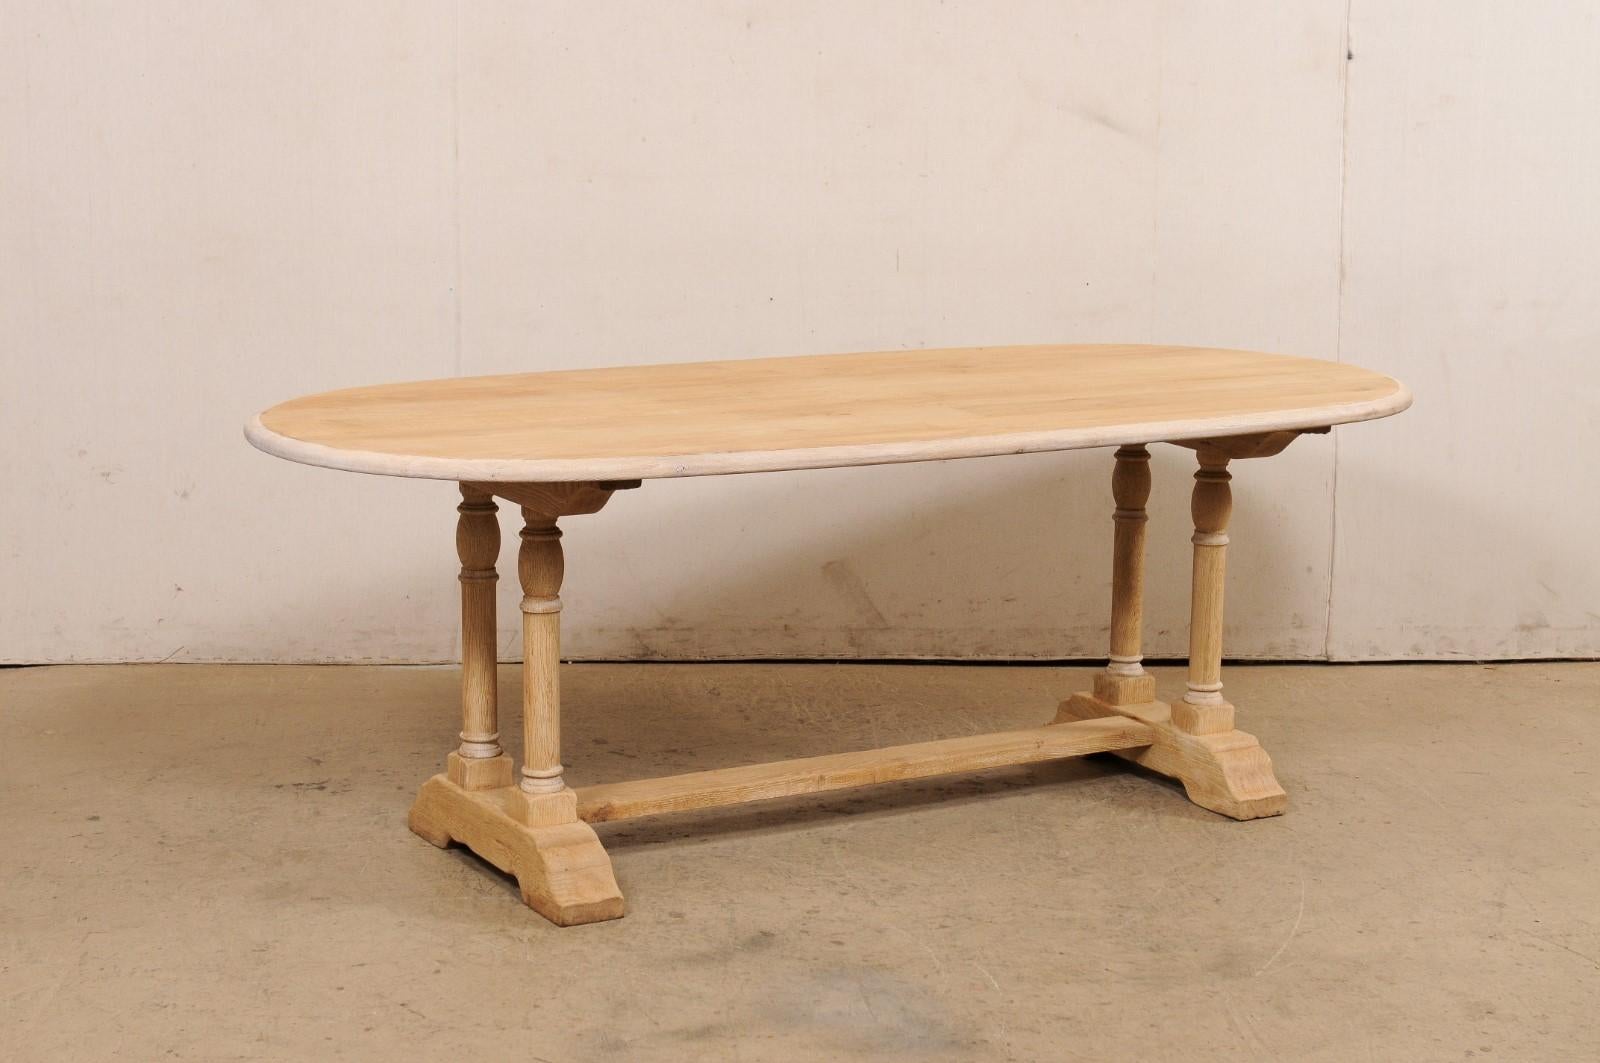 A French oval-shaped bleached oak dining table from the mid 20th century. This mid-century table from France features an oval-shaped top just over 6.75 foot long (approximately), which is presented upon trestle legs comprised of a pair of rounded